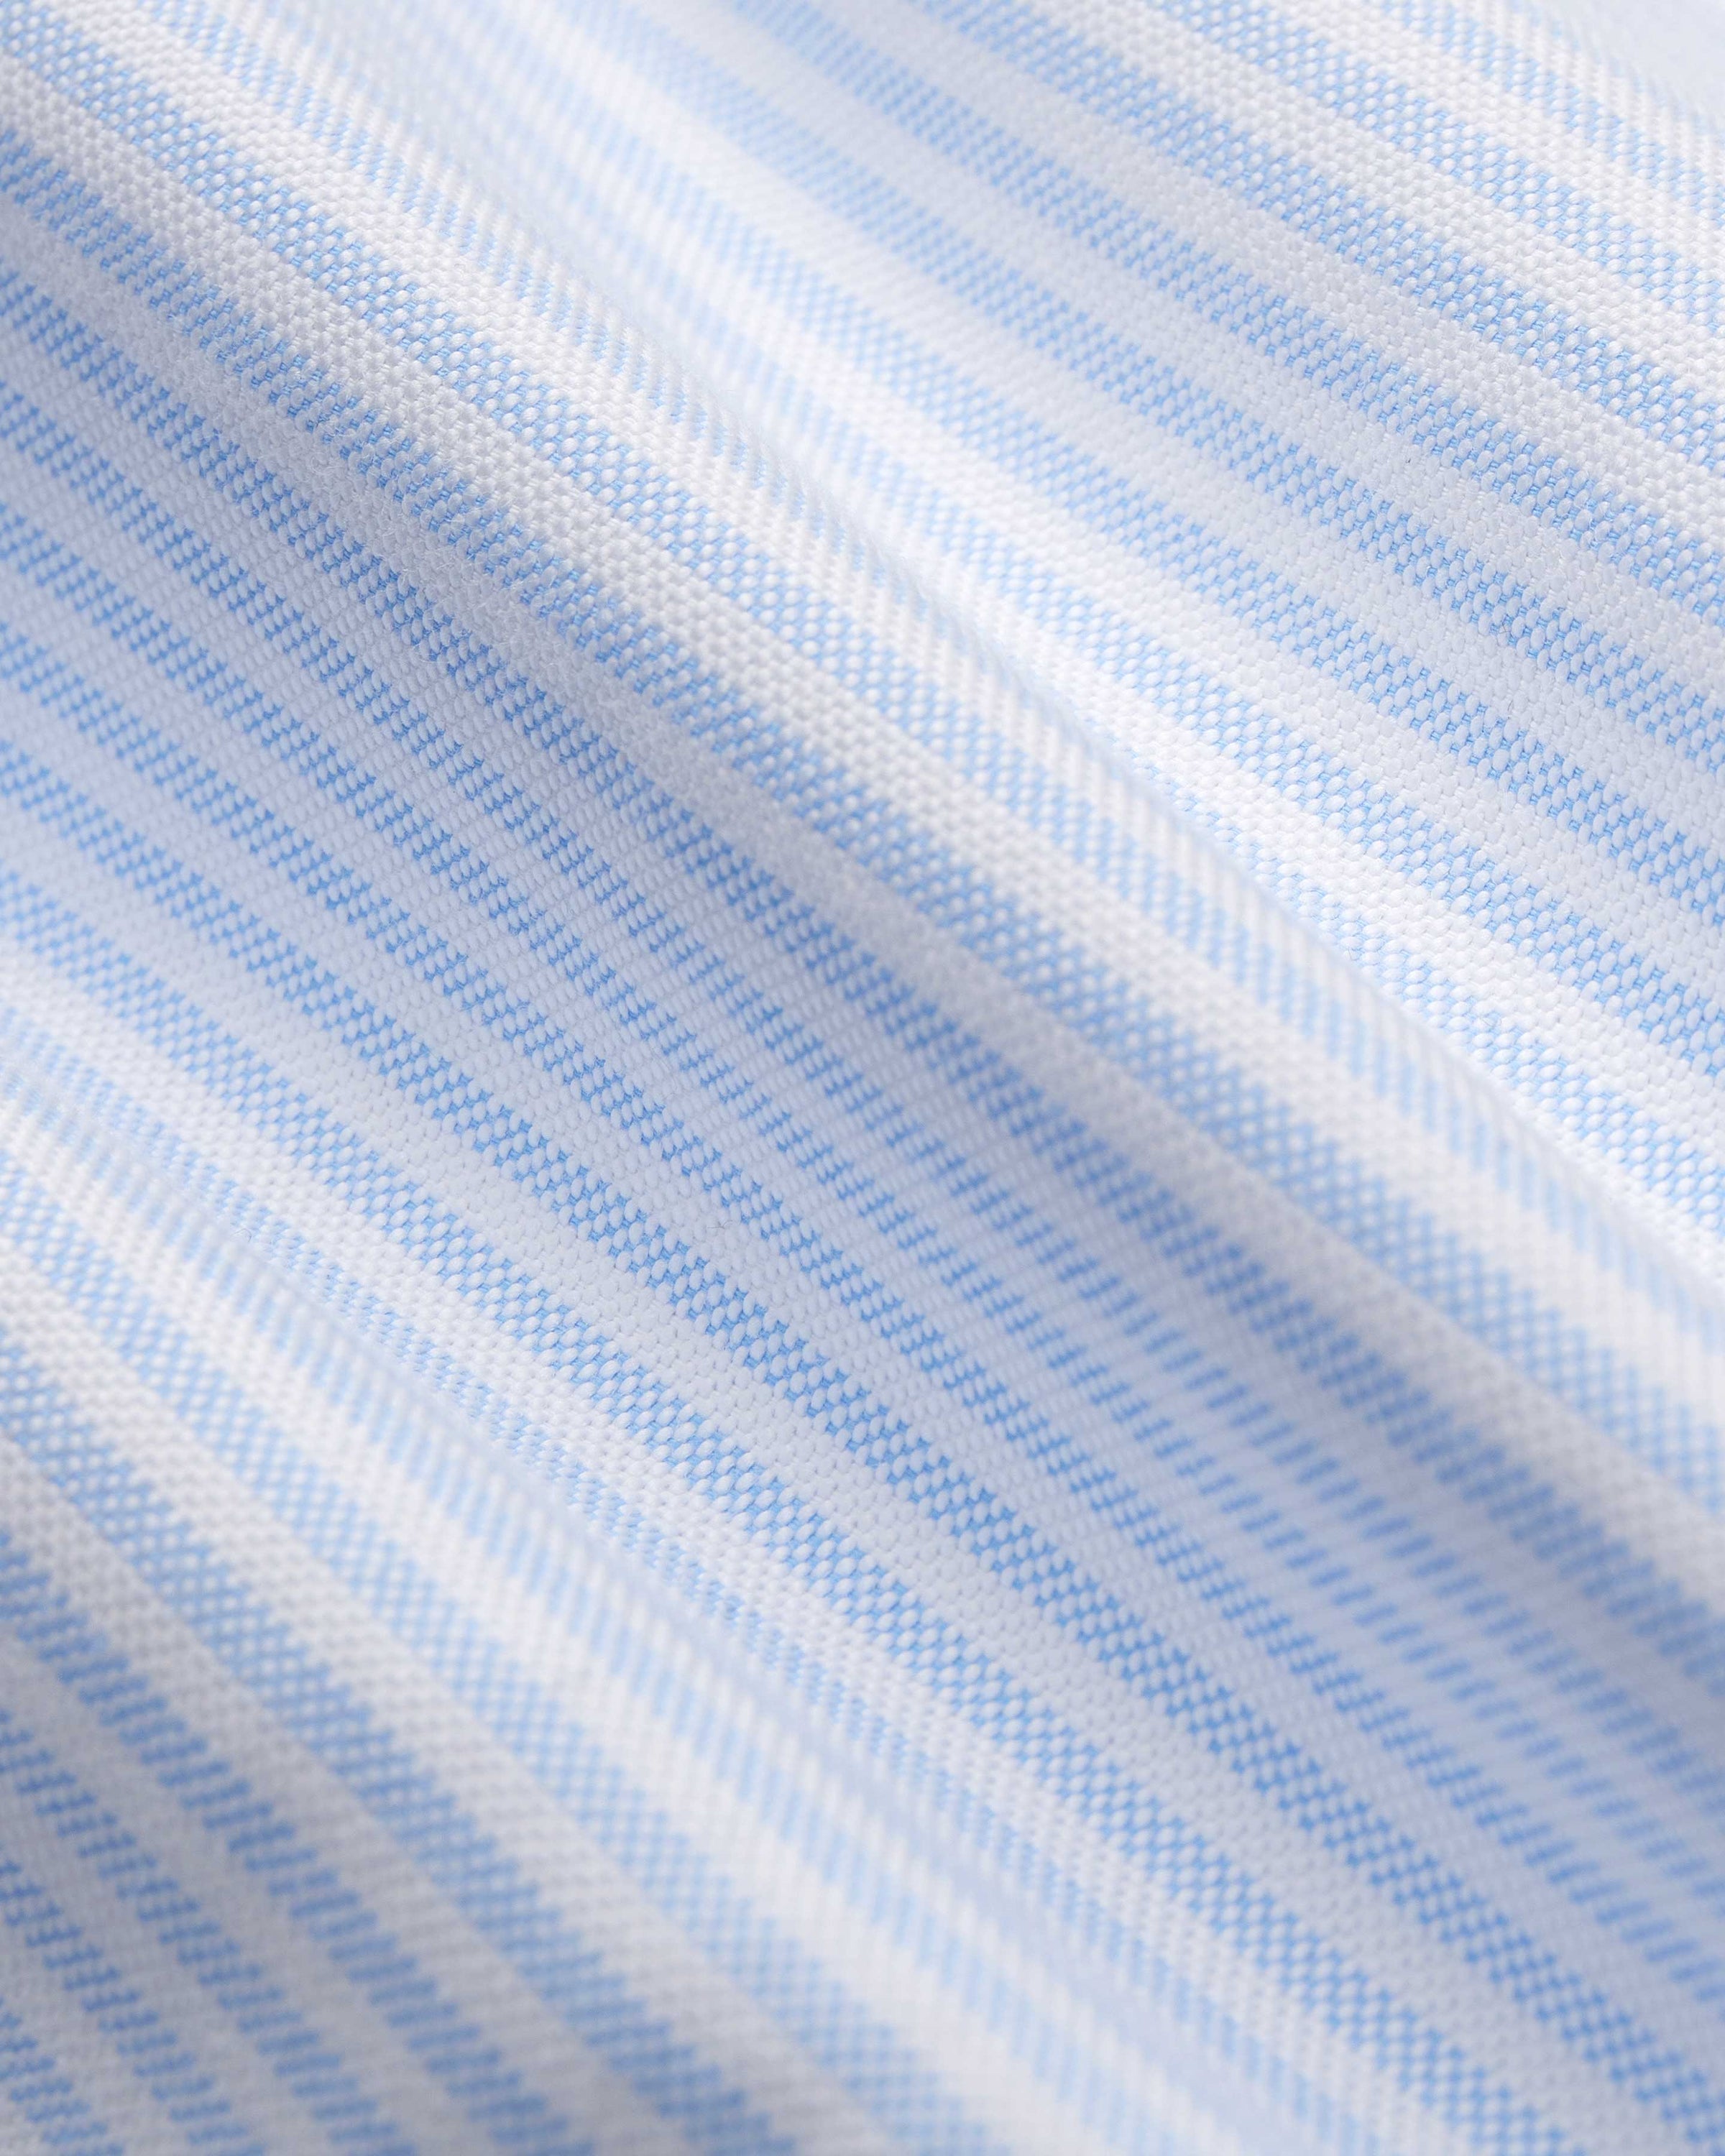 The Standard Issue Oxford, Blue Stripe